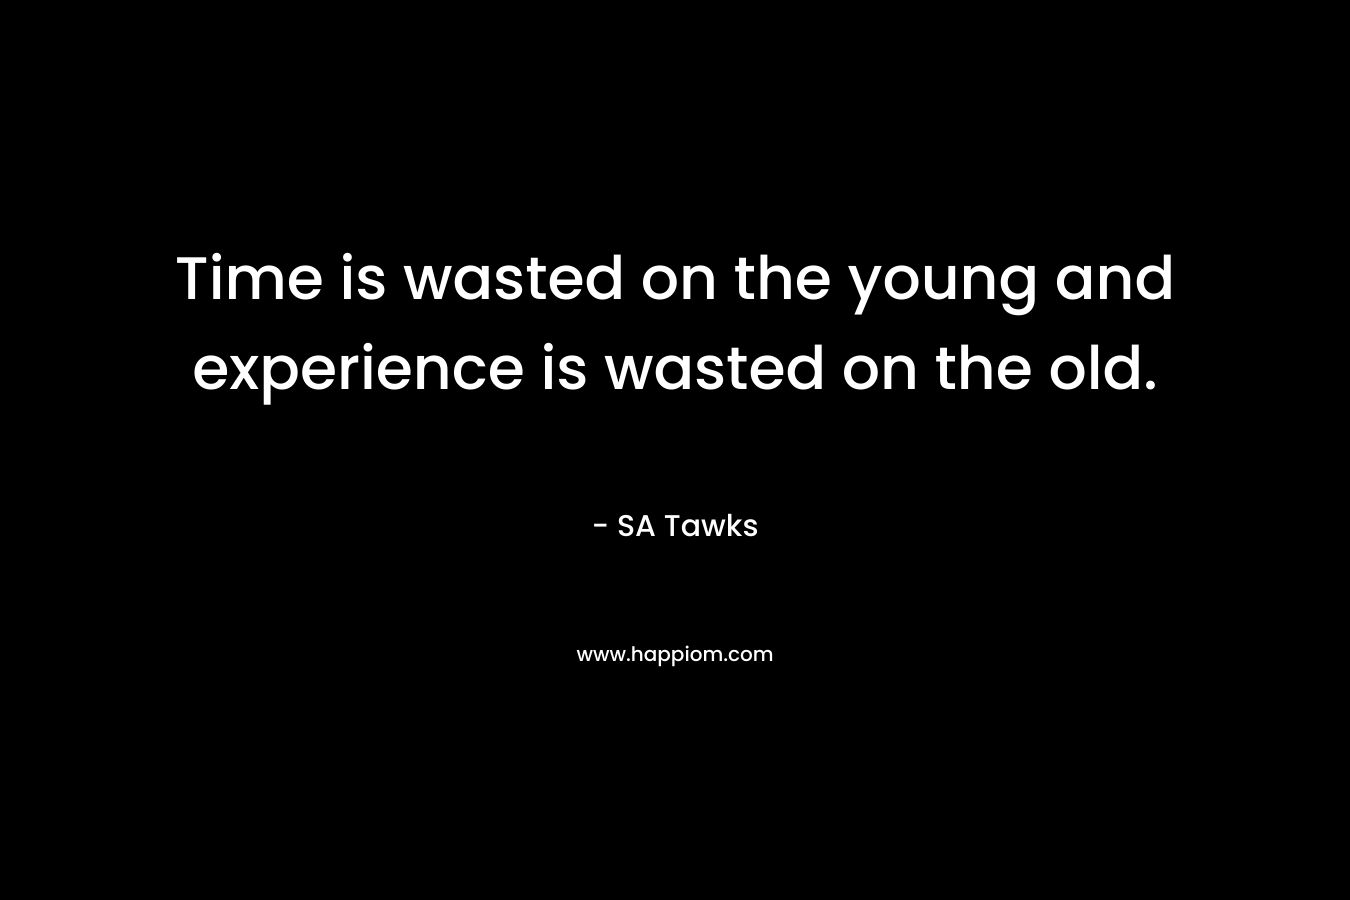 Time is wasted on the young and experience is wasted on the old.